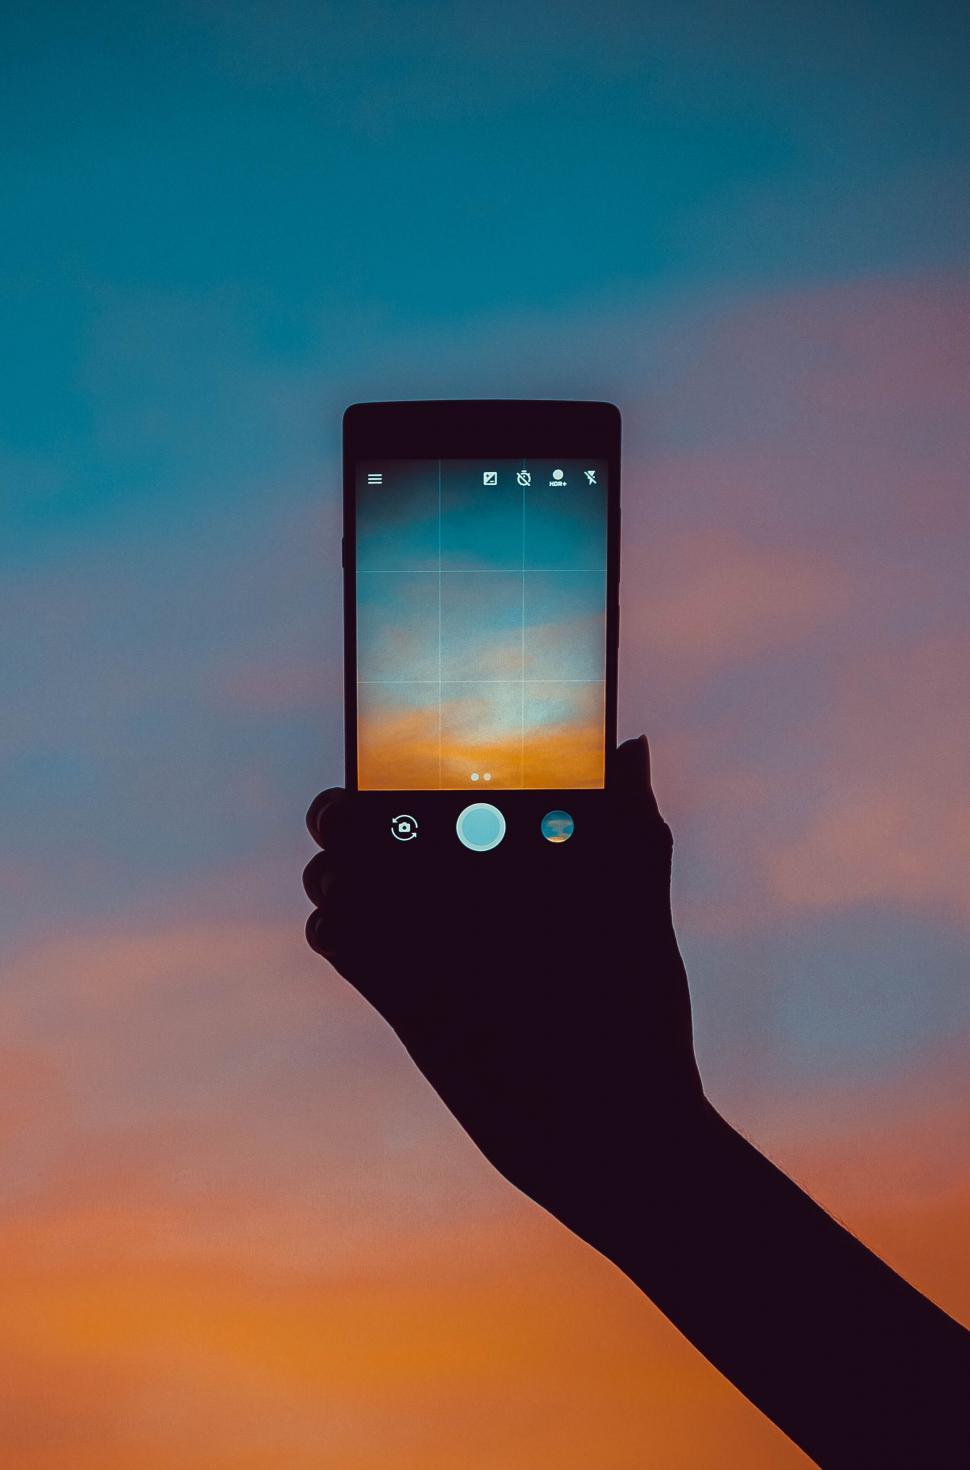 Free Image of Silhouette of hand holding a smartphone 